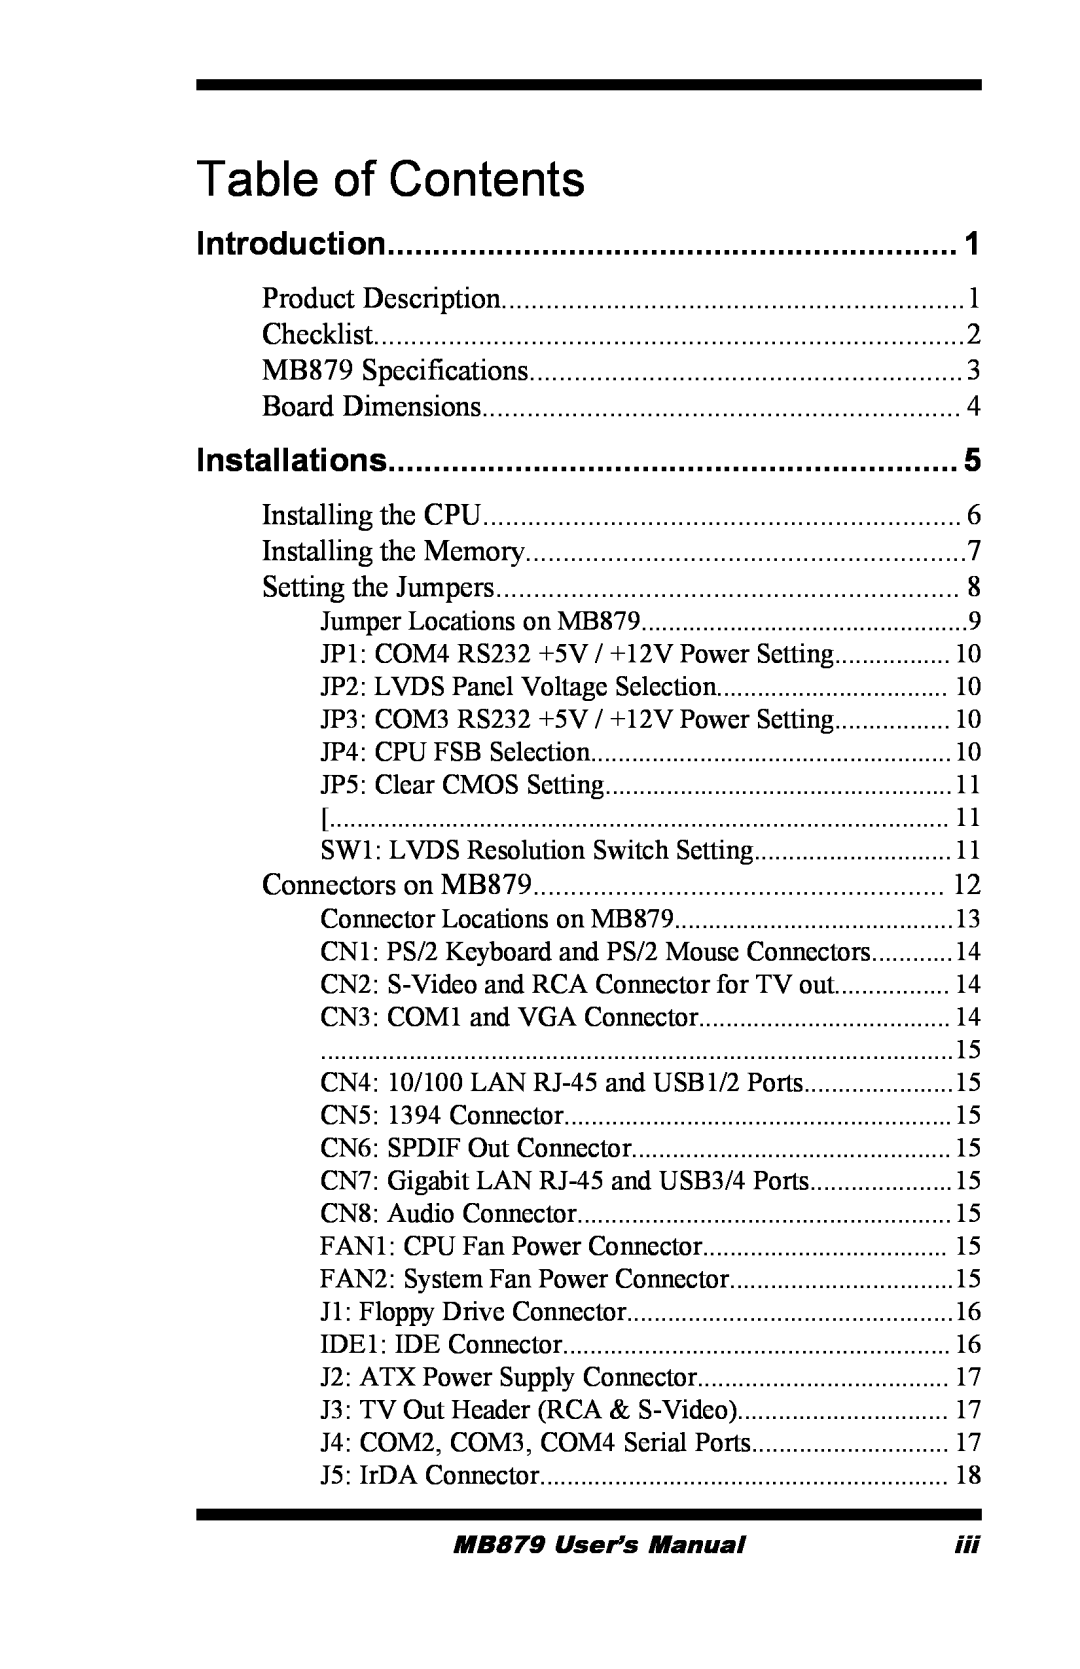 Intel MB879 user manual Introduction, Installations, Table of Contents 